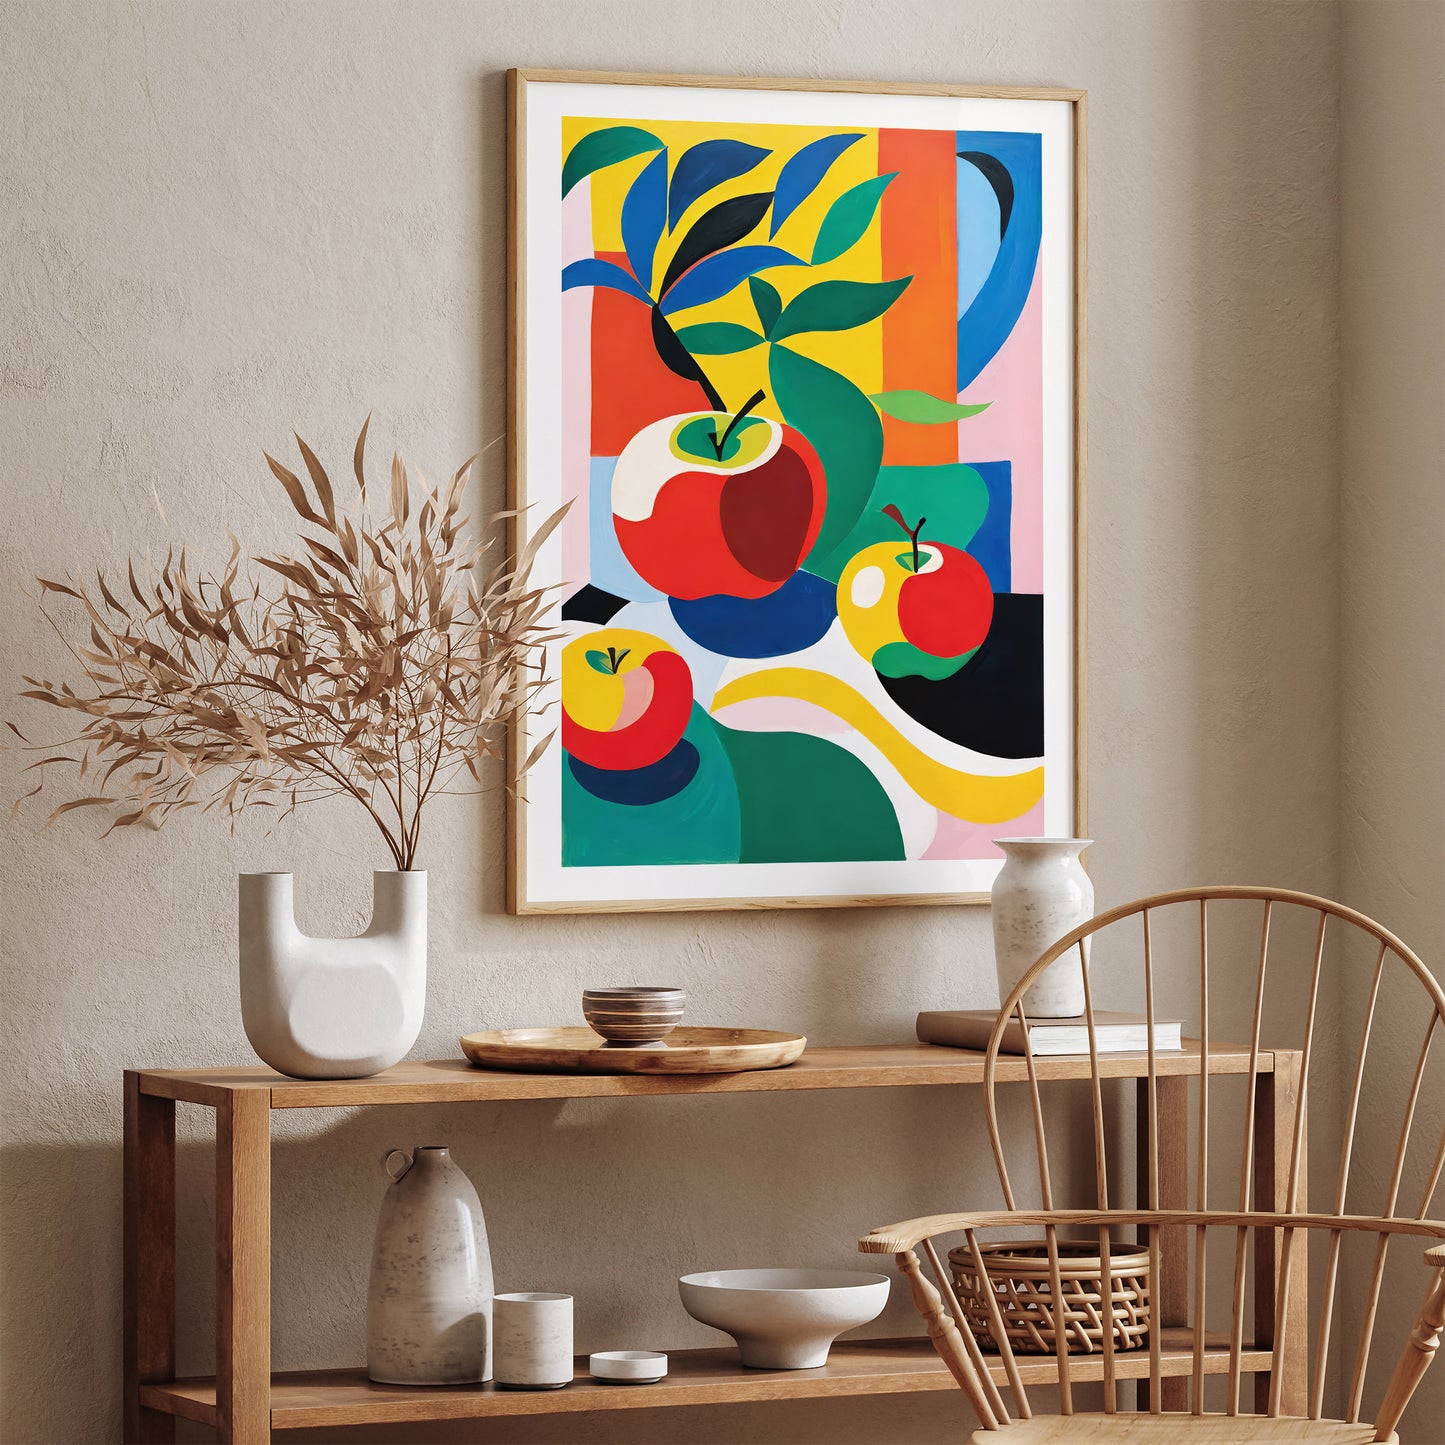 Modern Colorful Apple and Leaf Design Art Poster - Kitchen Wall Decor